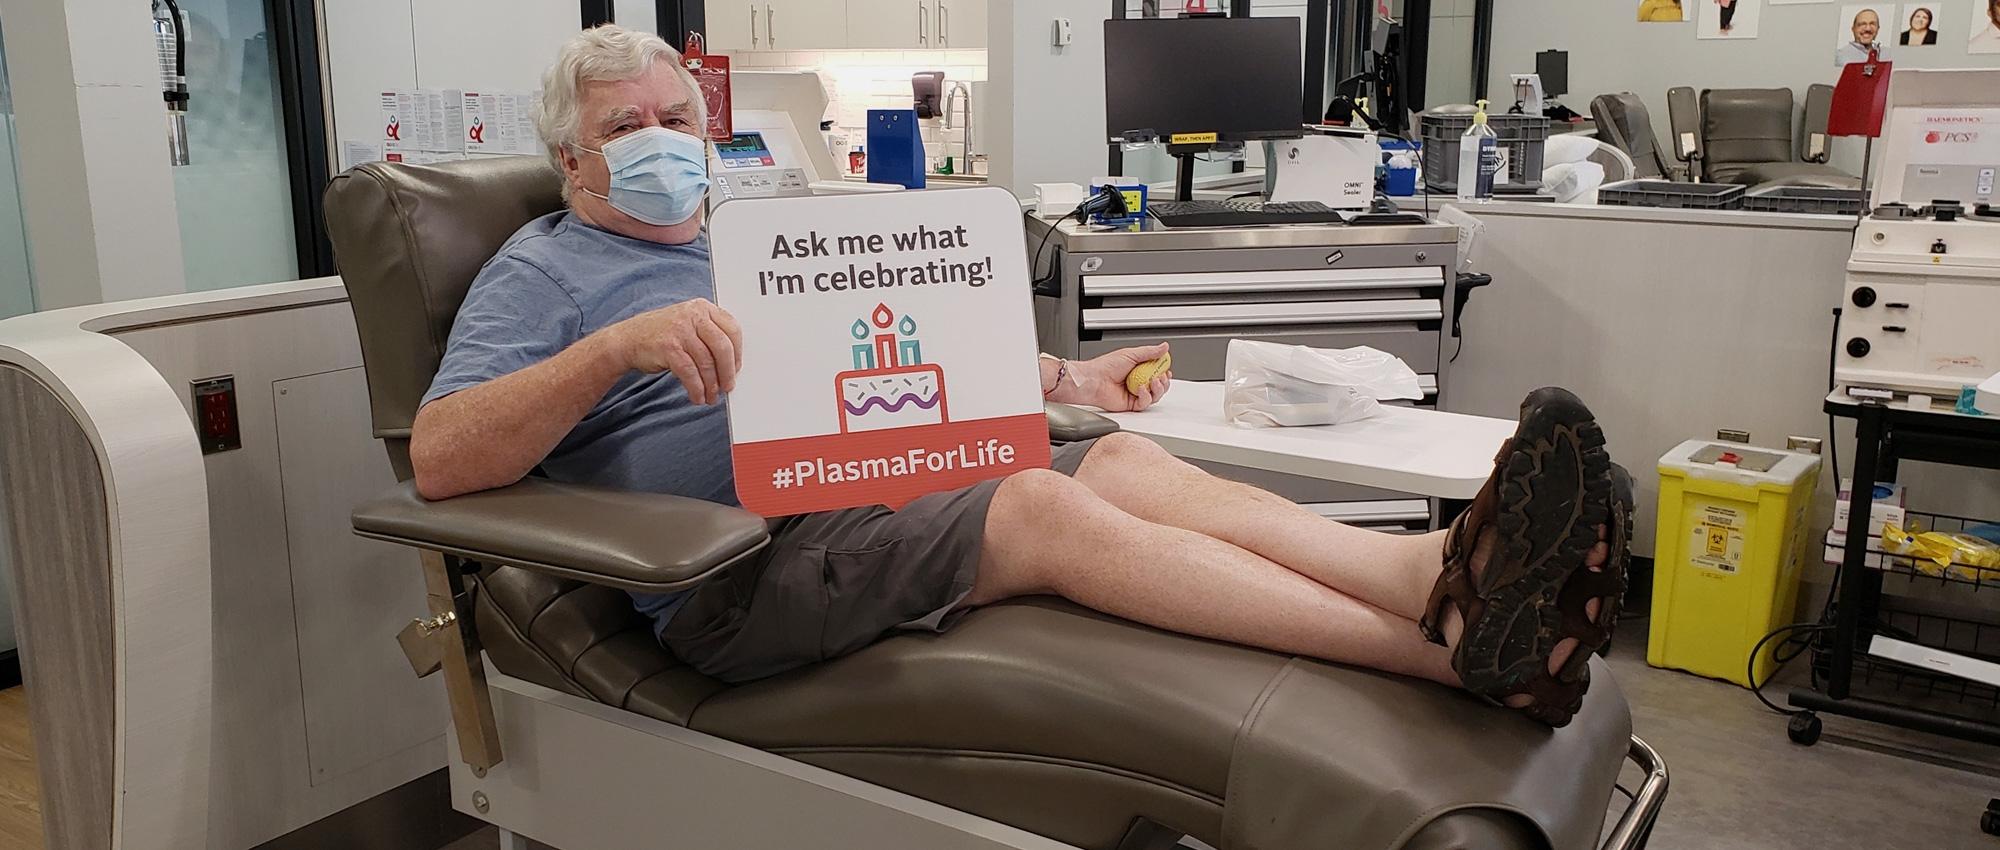 A plasma donor donates plasma while holding a sign that says “Ask me what I’m celebrating!”